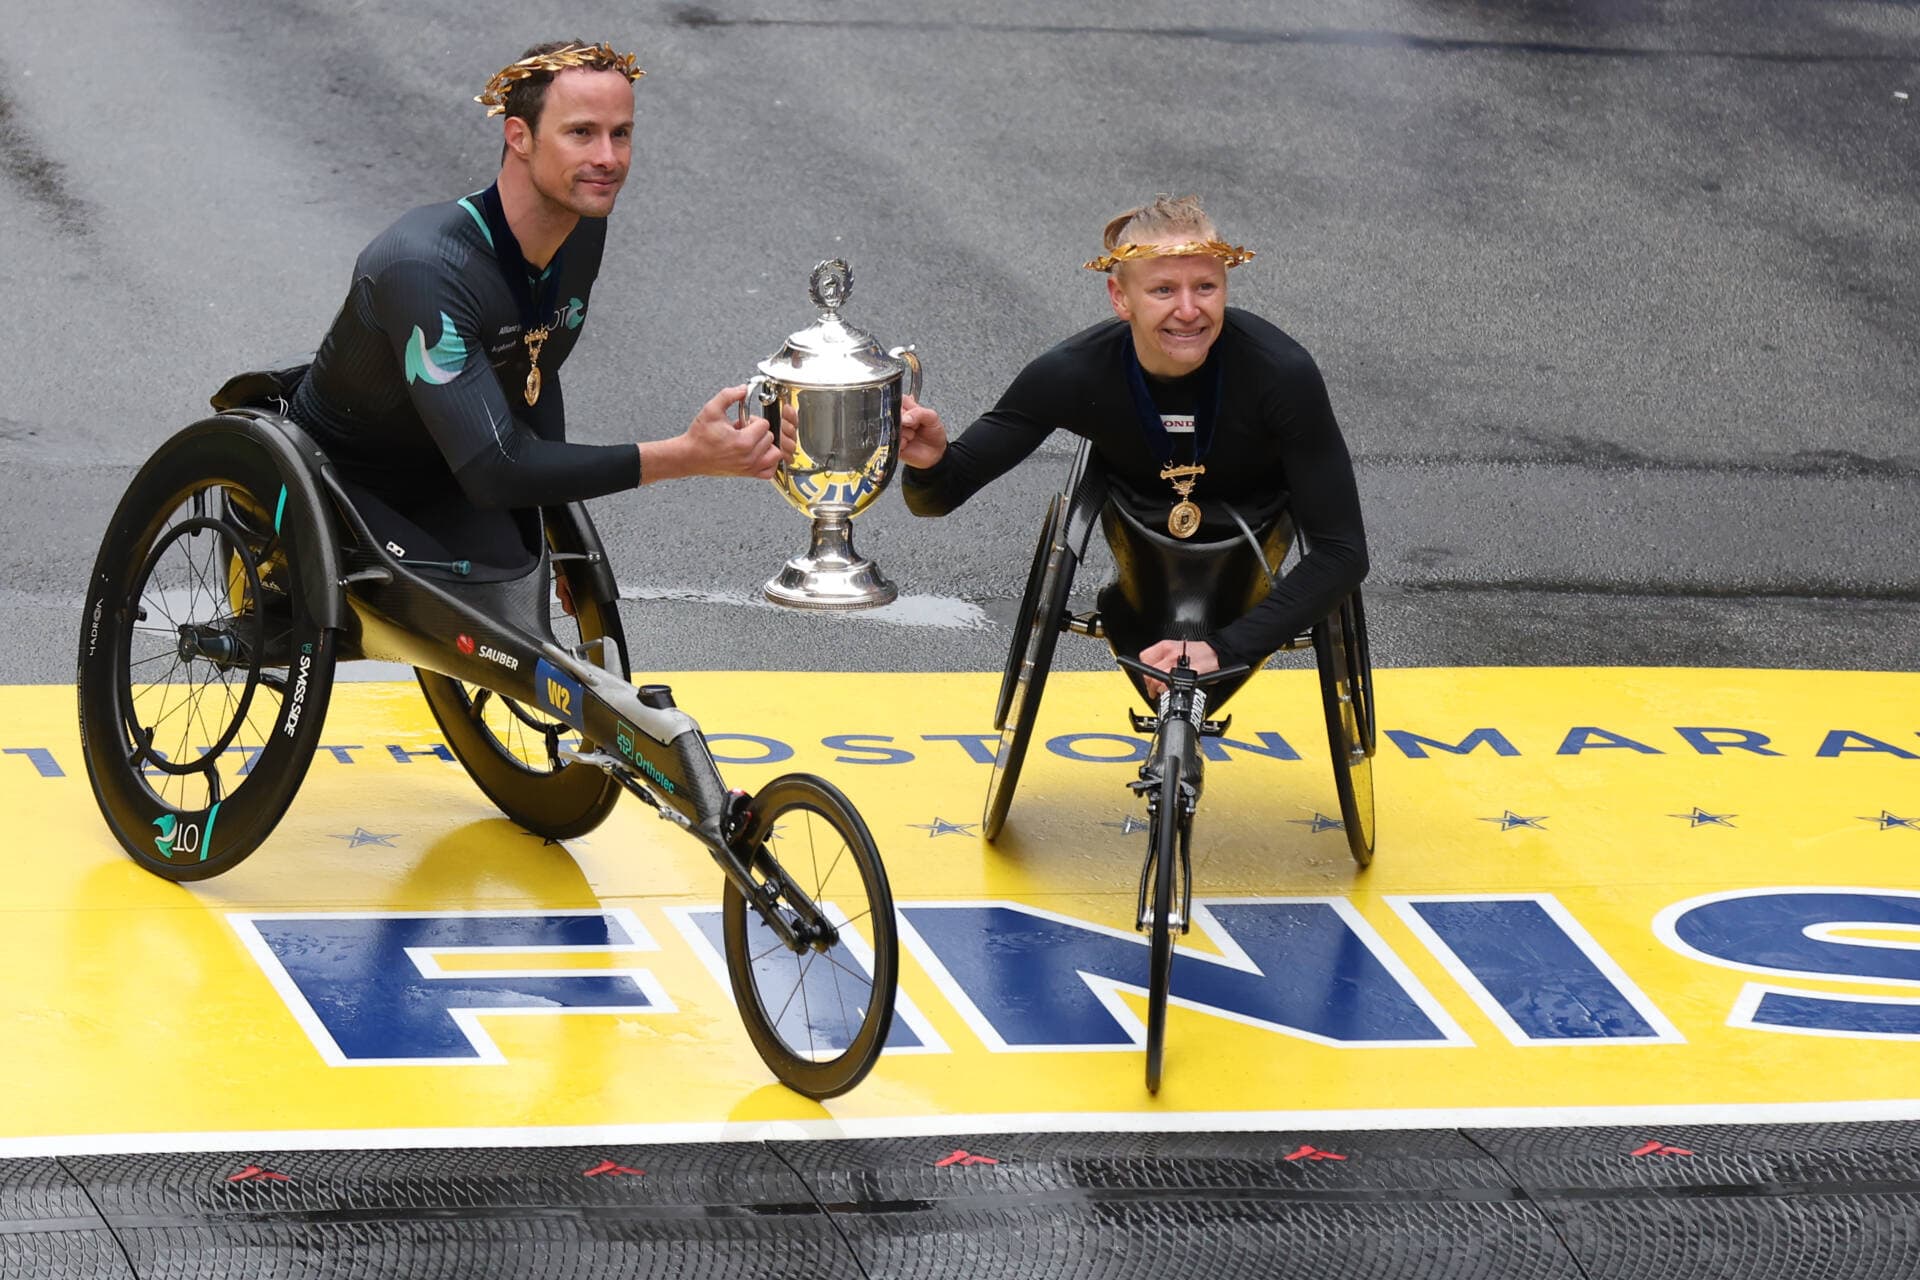 Marcel Hug of Switzerland, left, and Susannah Scaroni of the United States pose with the trophy after winning the professional Men's Wheelchair Division and professional Women's Wheelchair Division respectively during the 127th Boston Marathon on April 17 in Boston. (Omar Rawlings/Getty Images)